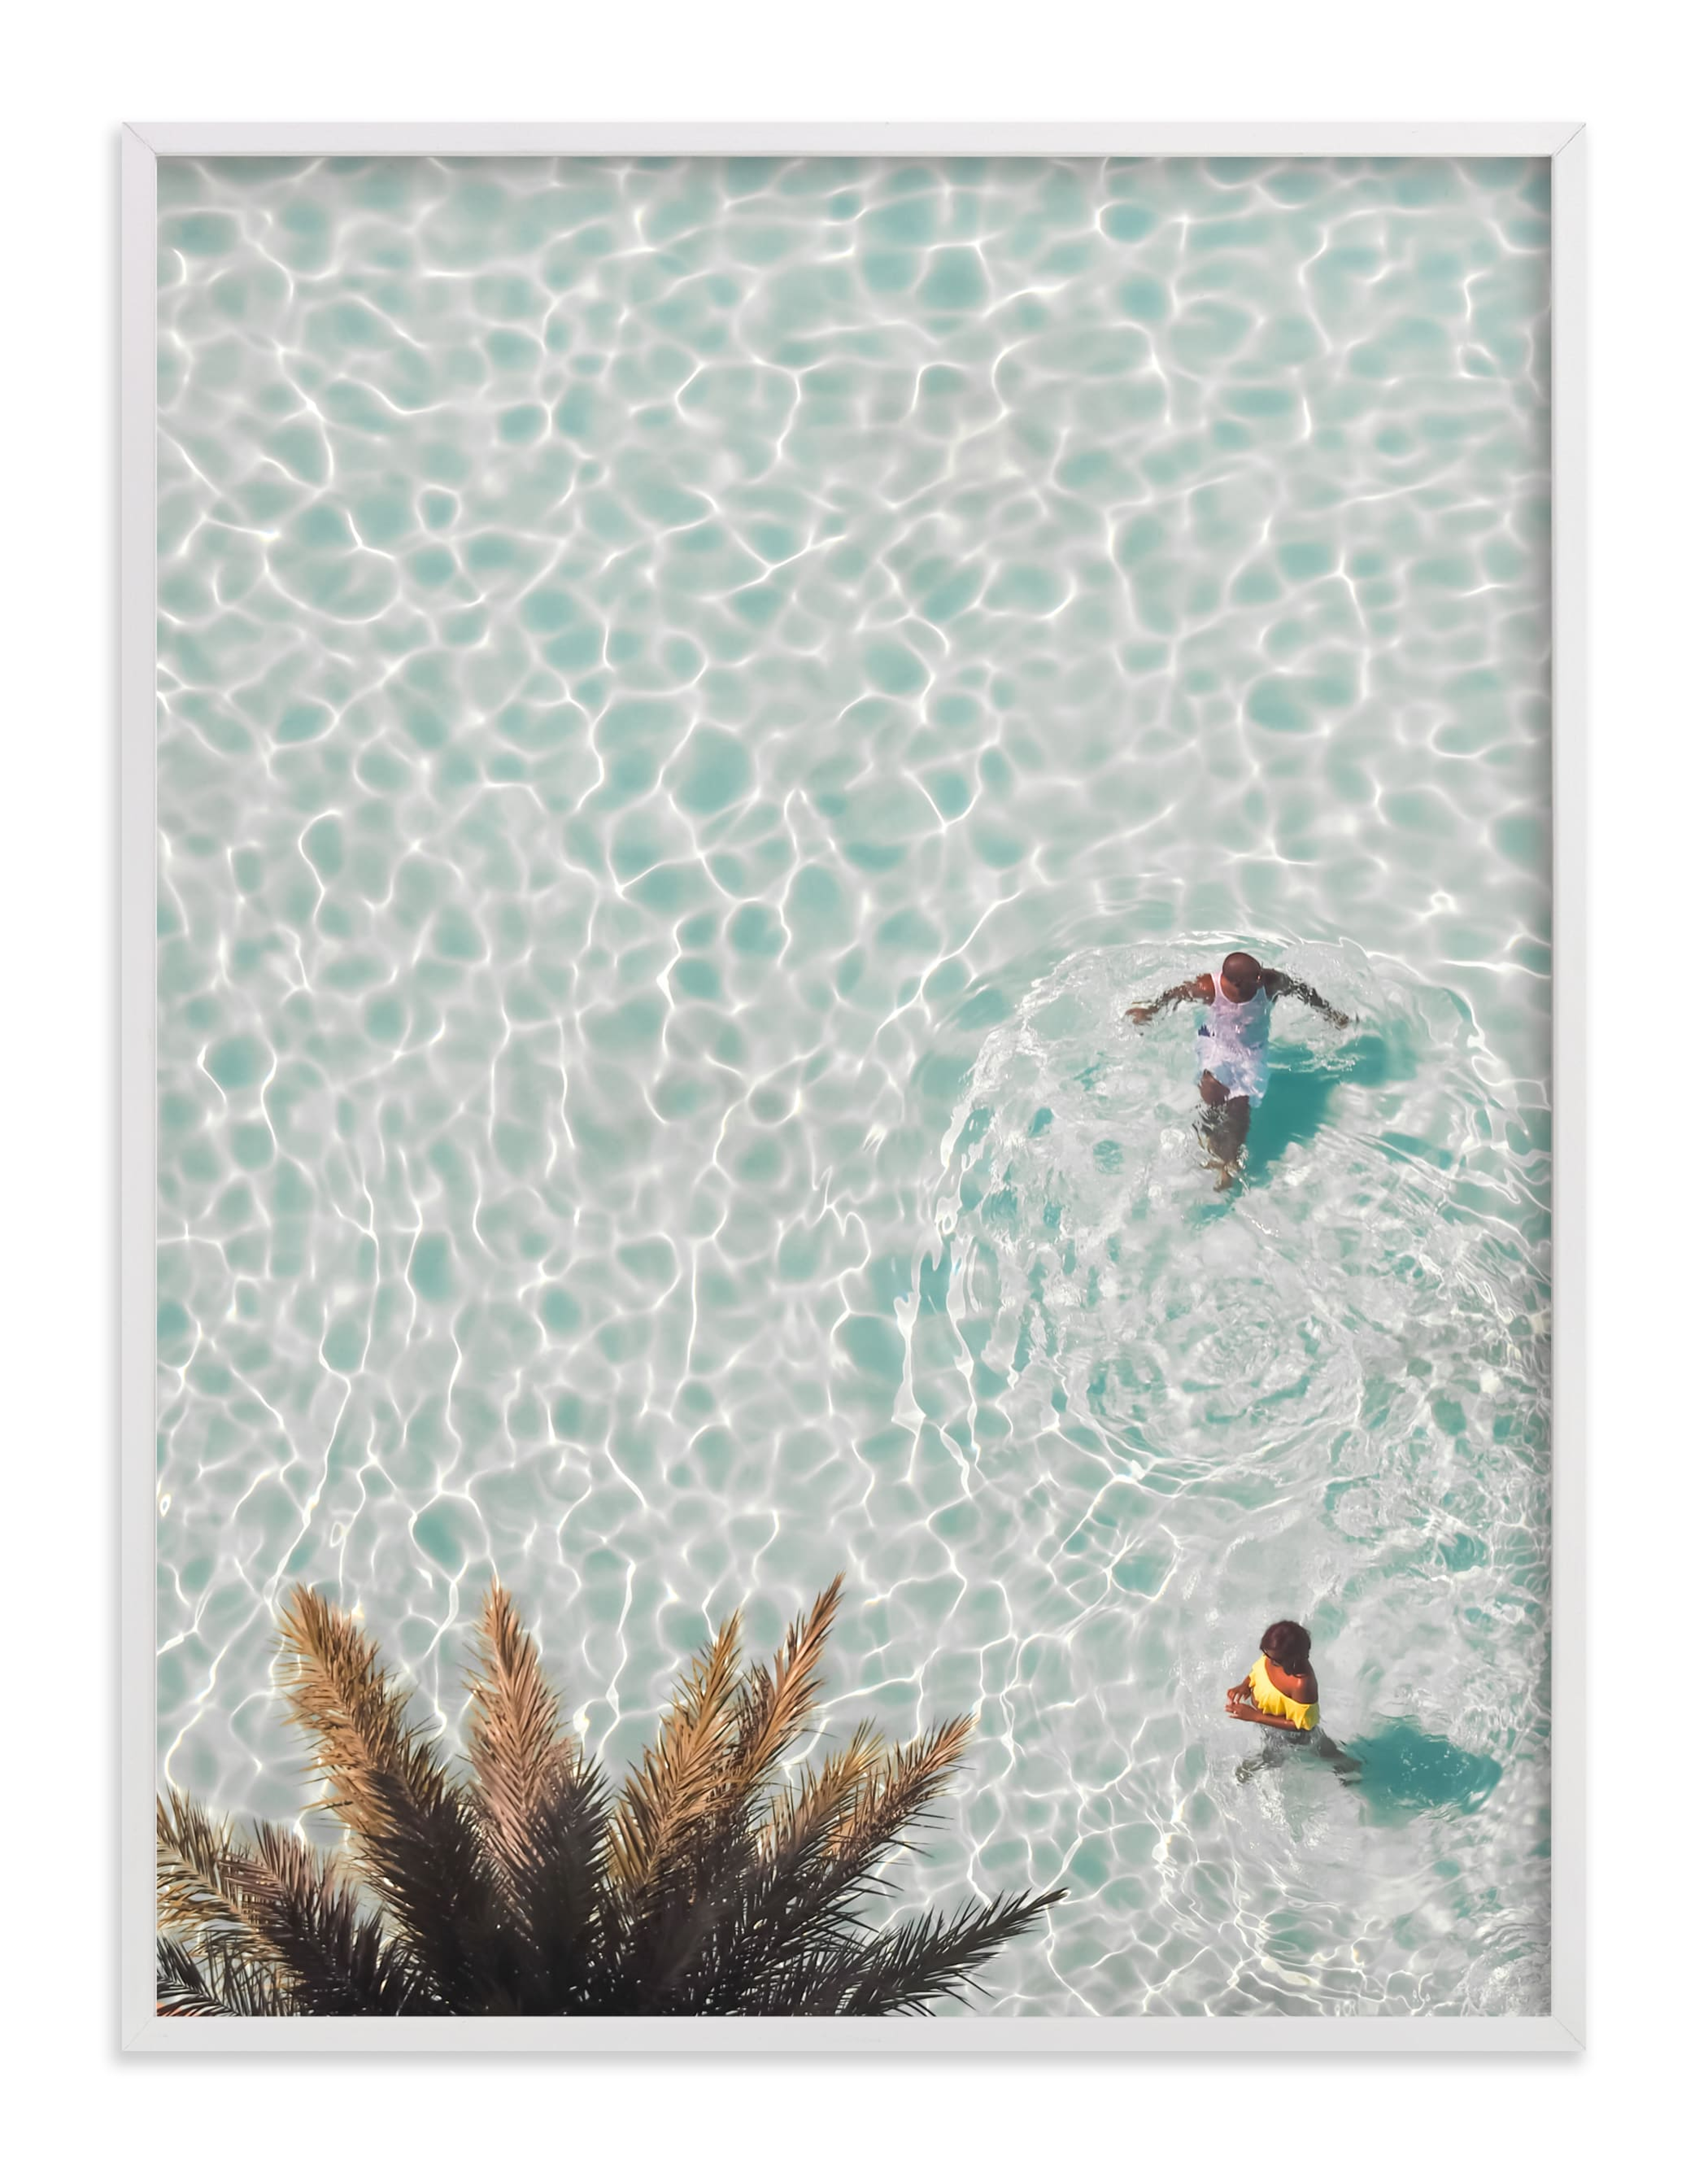 Pool Party for Two  - 30" x 40" - white wood frame - Minted